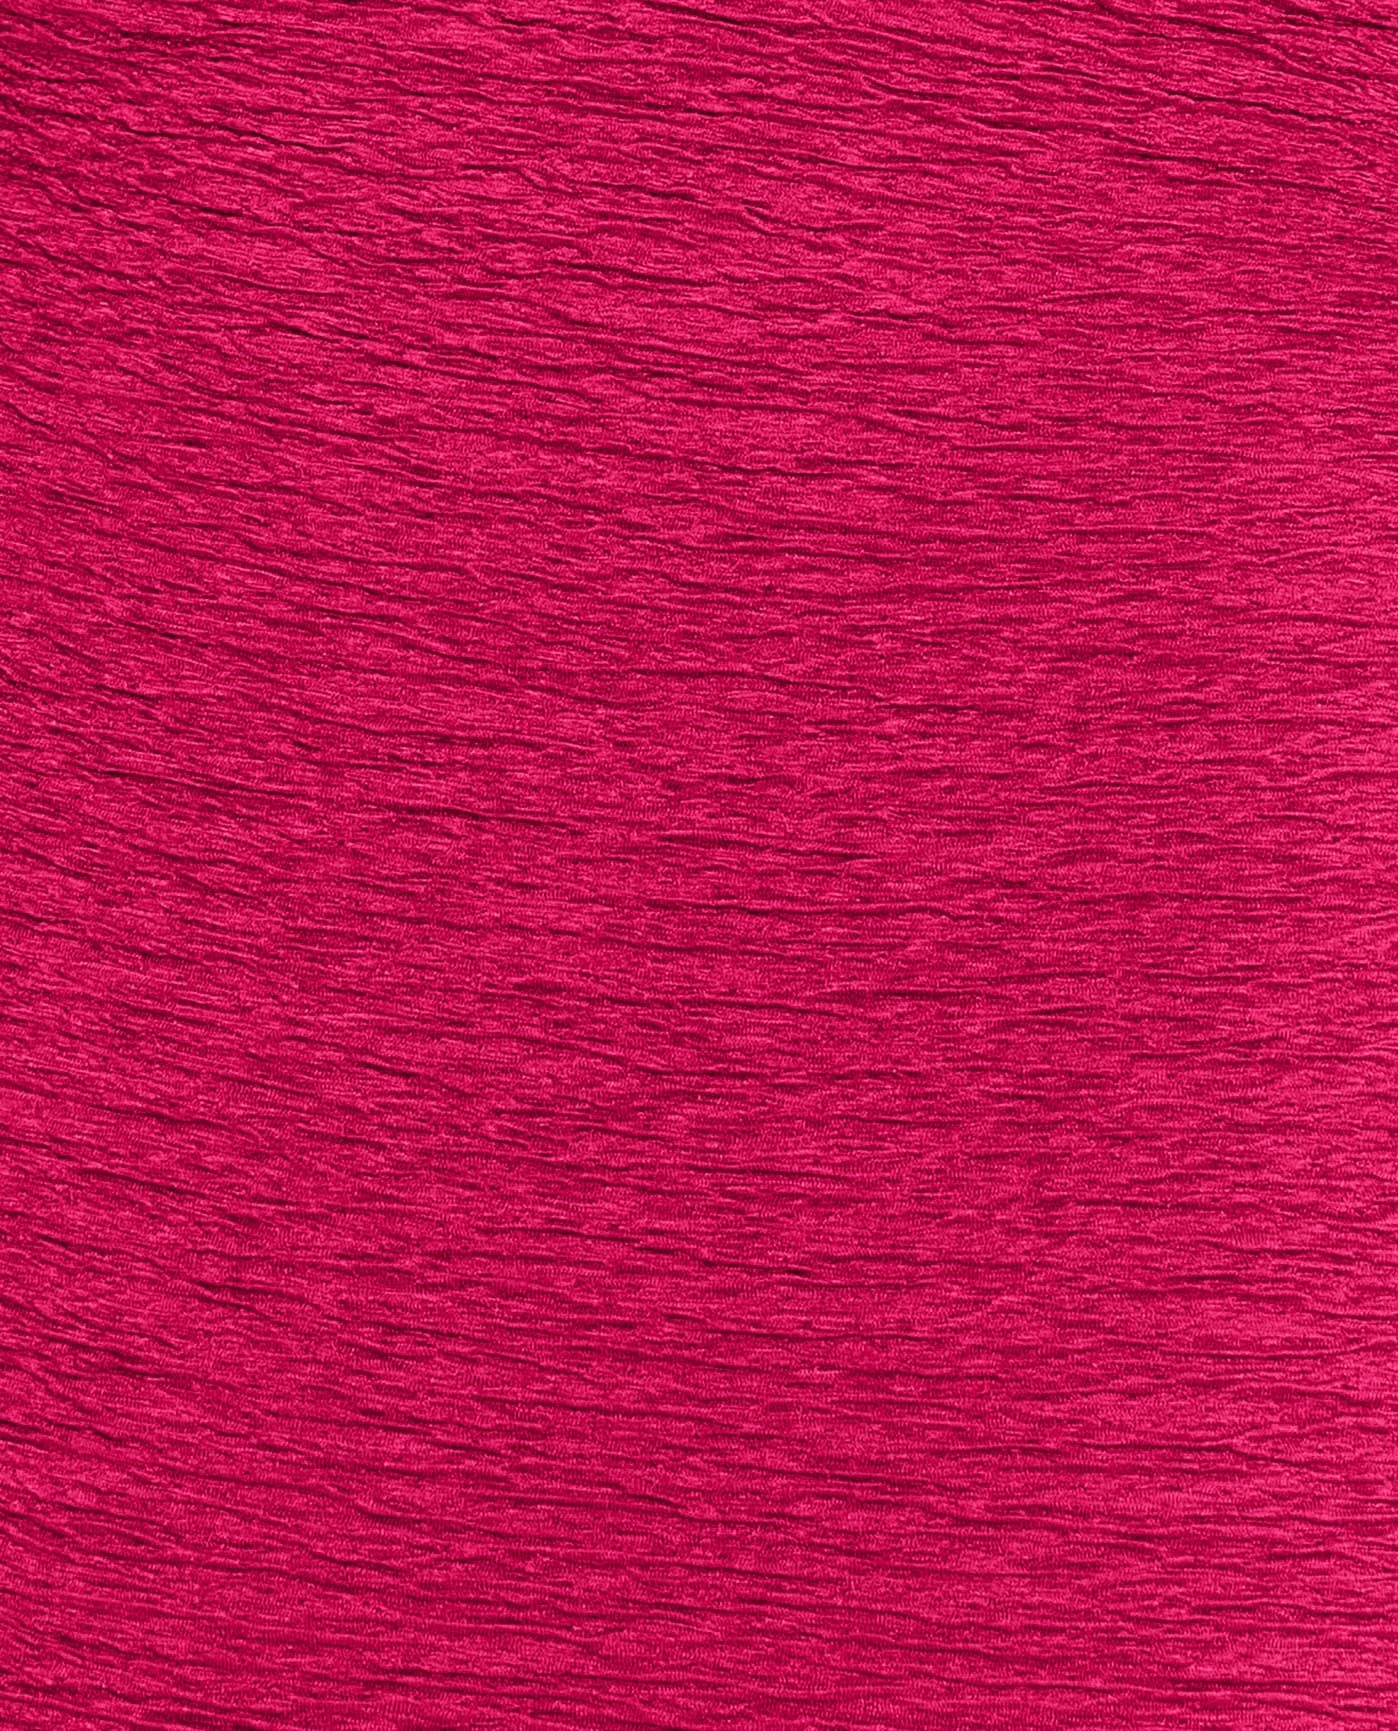 FABRIC SWATCH VIEW OF CHLORINE RESISTANT KRINKLE TEXTURED SOLID TWIST FRONT LONG TORSO ONE PIECE | KRINKLE BERRY